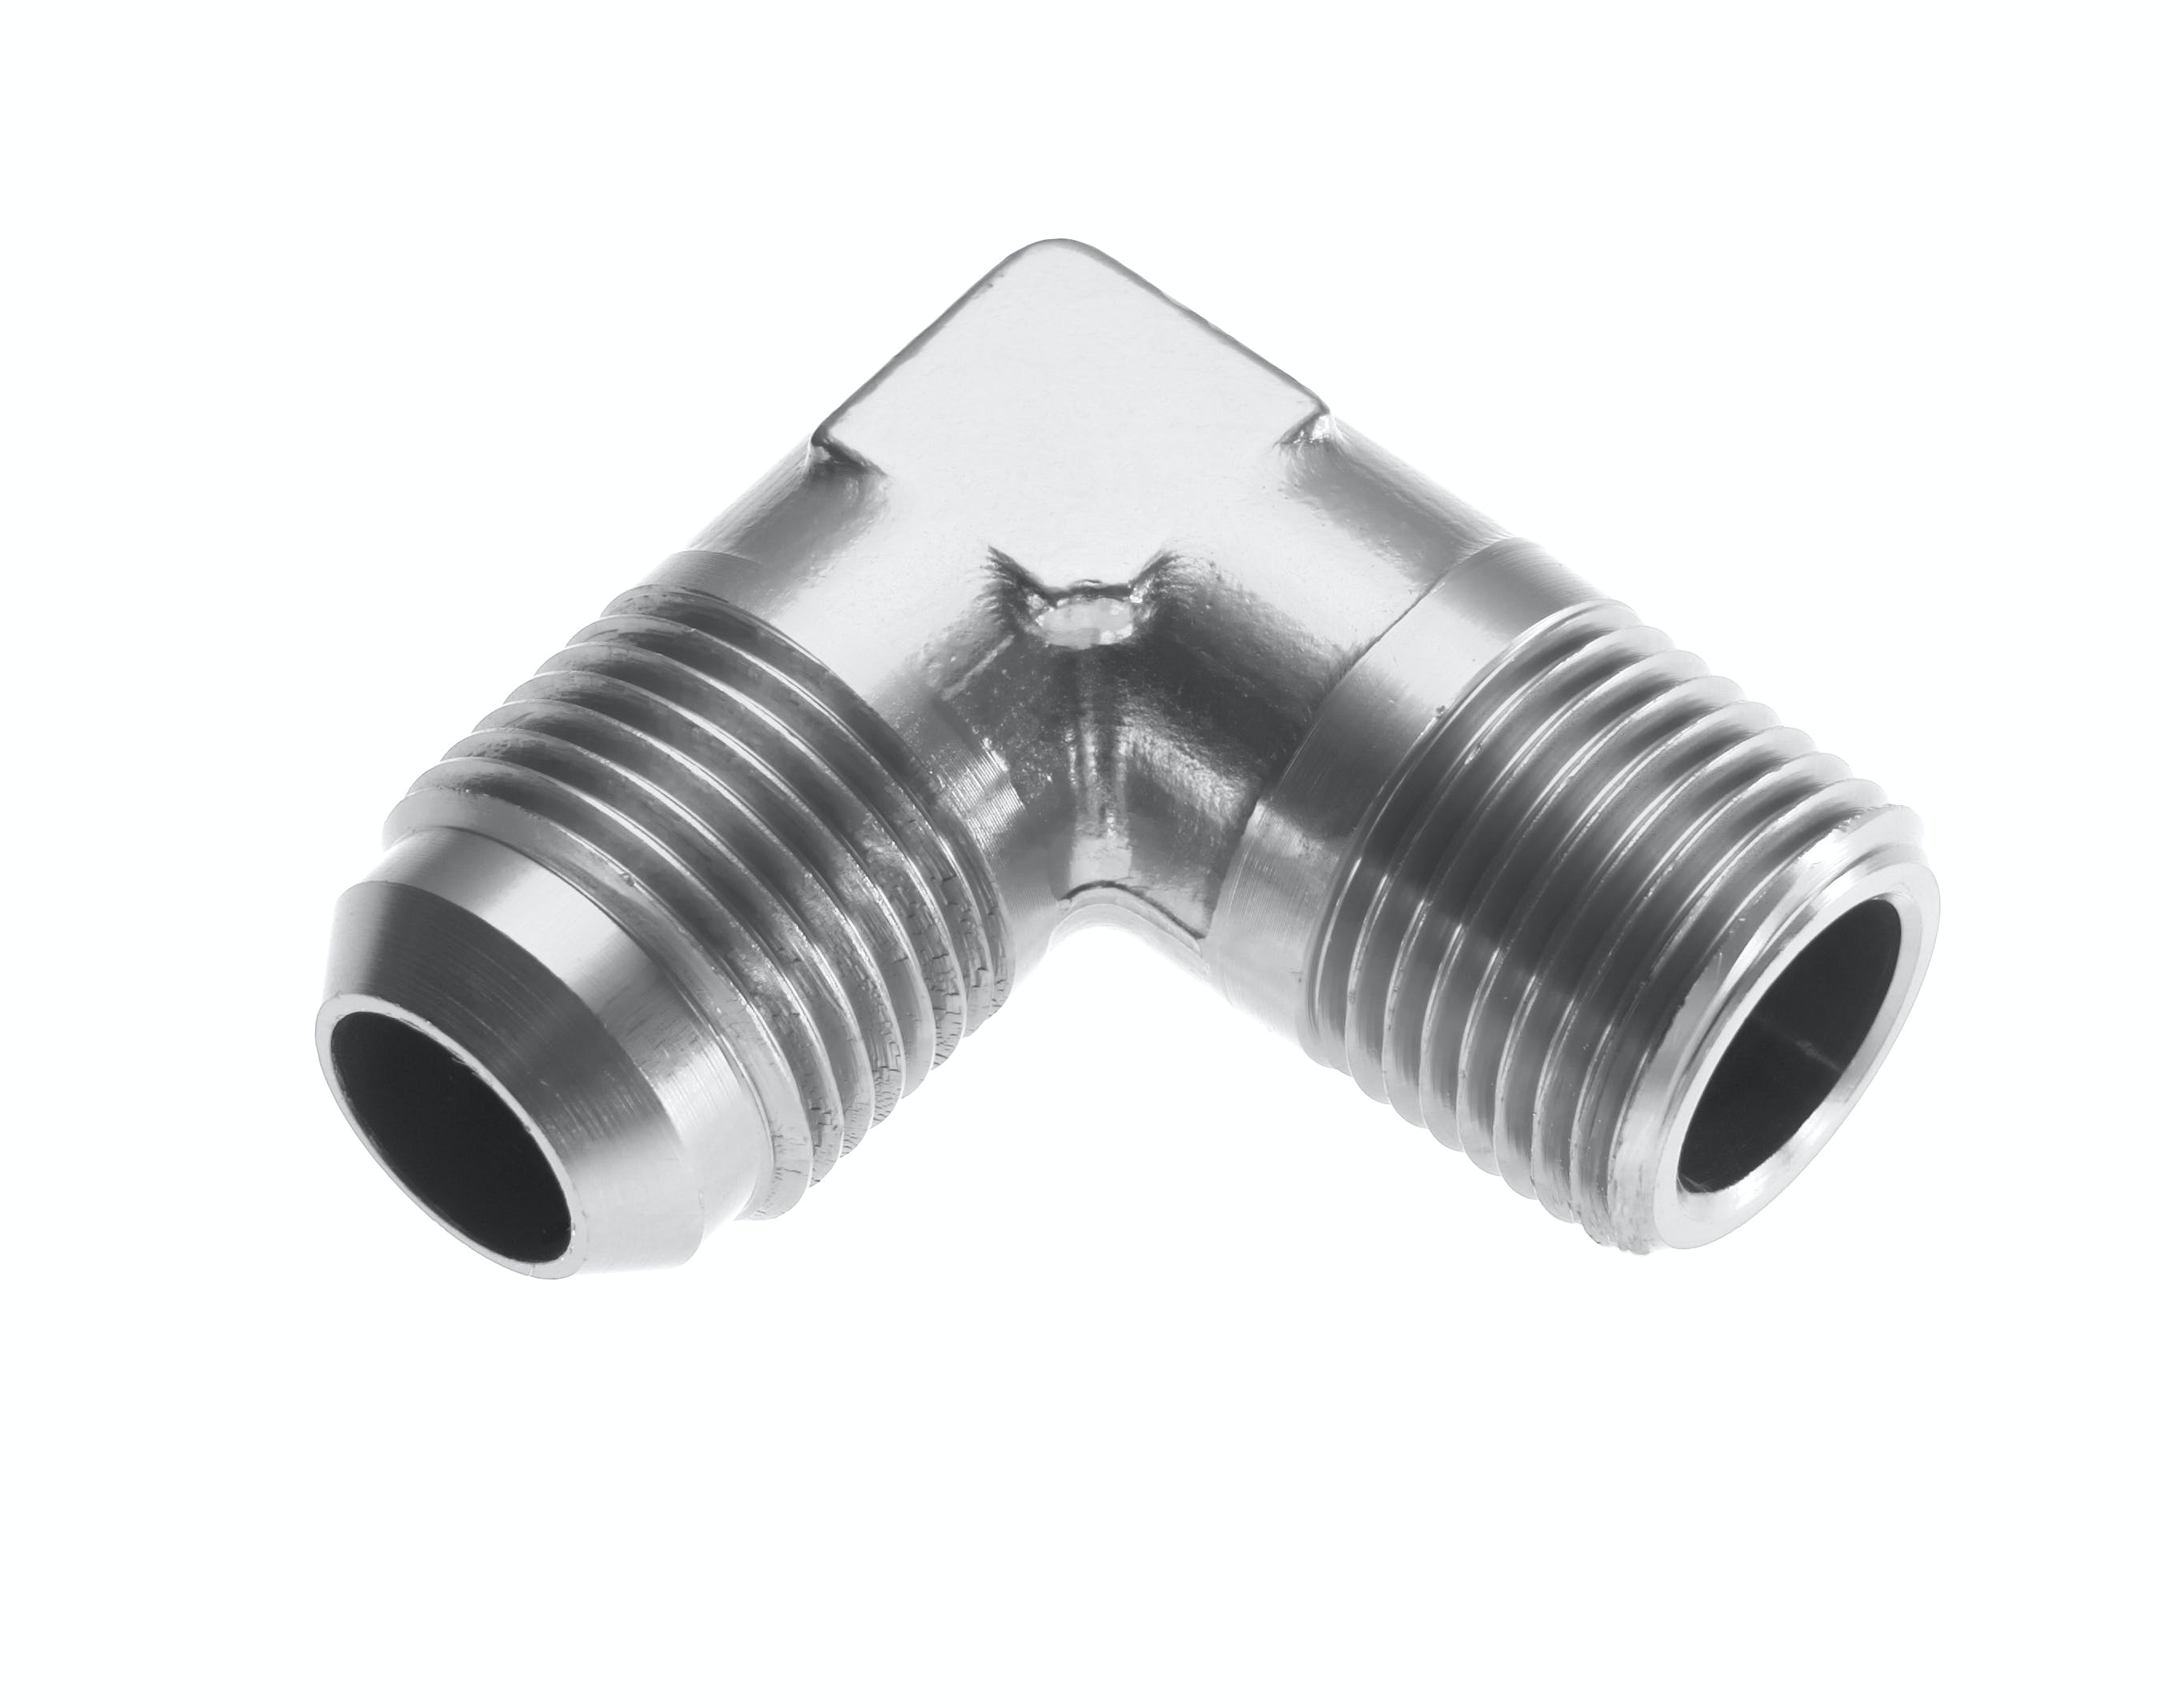 Redhorse Performance 822-08-04-5 -08 90 degree Male adapter to -04 (1/4in) NPT Male - clear